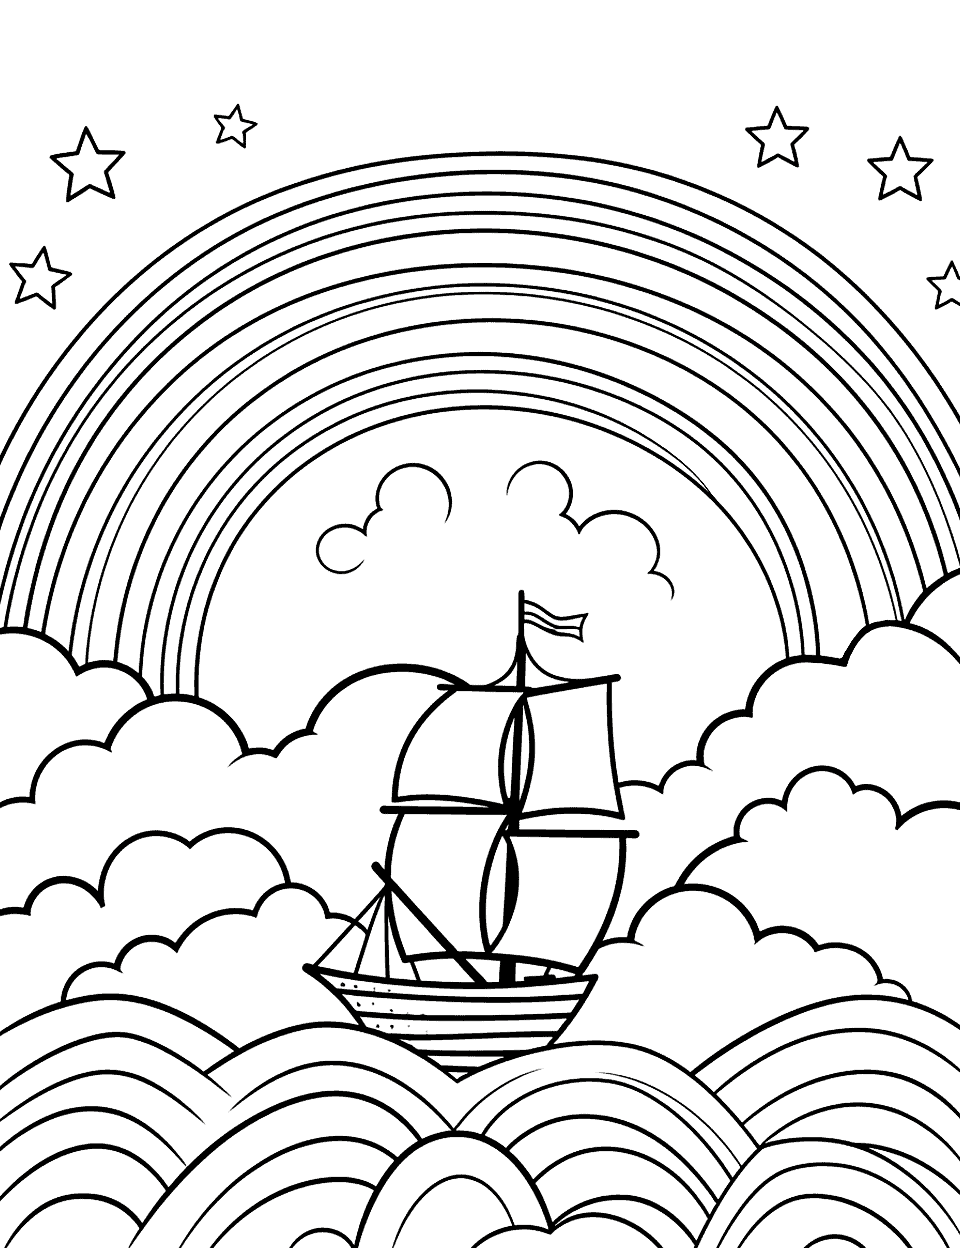 Pirate Ship Under the Rainbow Coloring Page - A pirate ship sailing on the sea with a rainbow in the background.